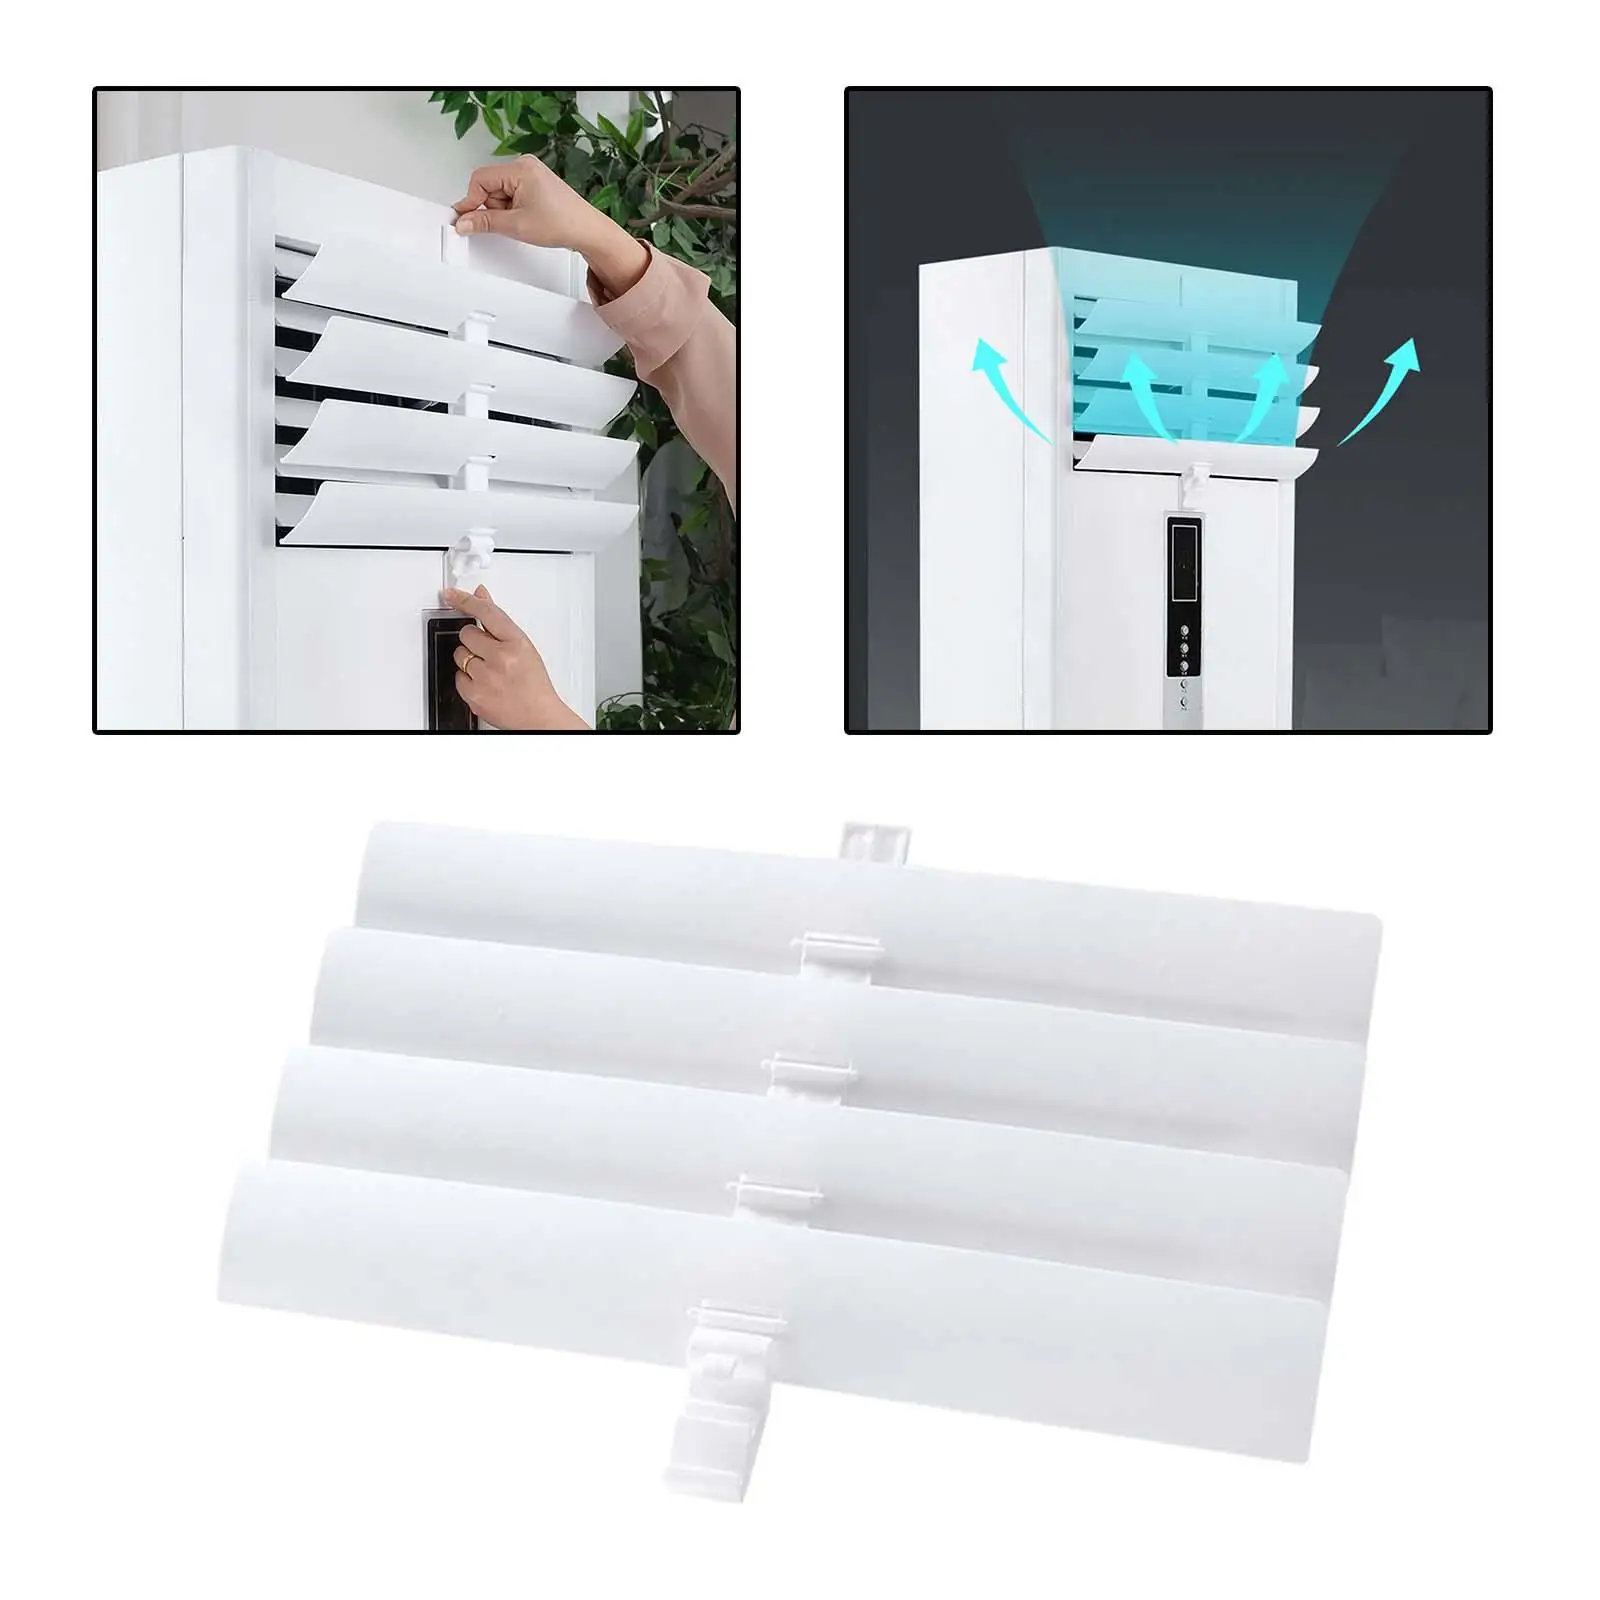 Vertical Air Conditioner Wind Deflector Outlet Air Baffle Wind Direction for Home Office air Conditioning Deflector